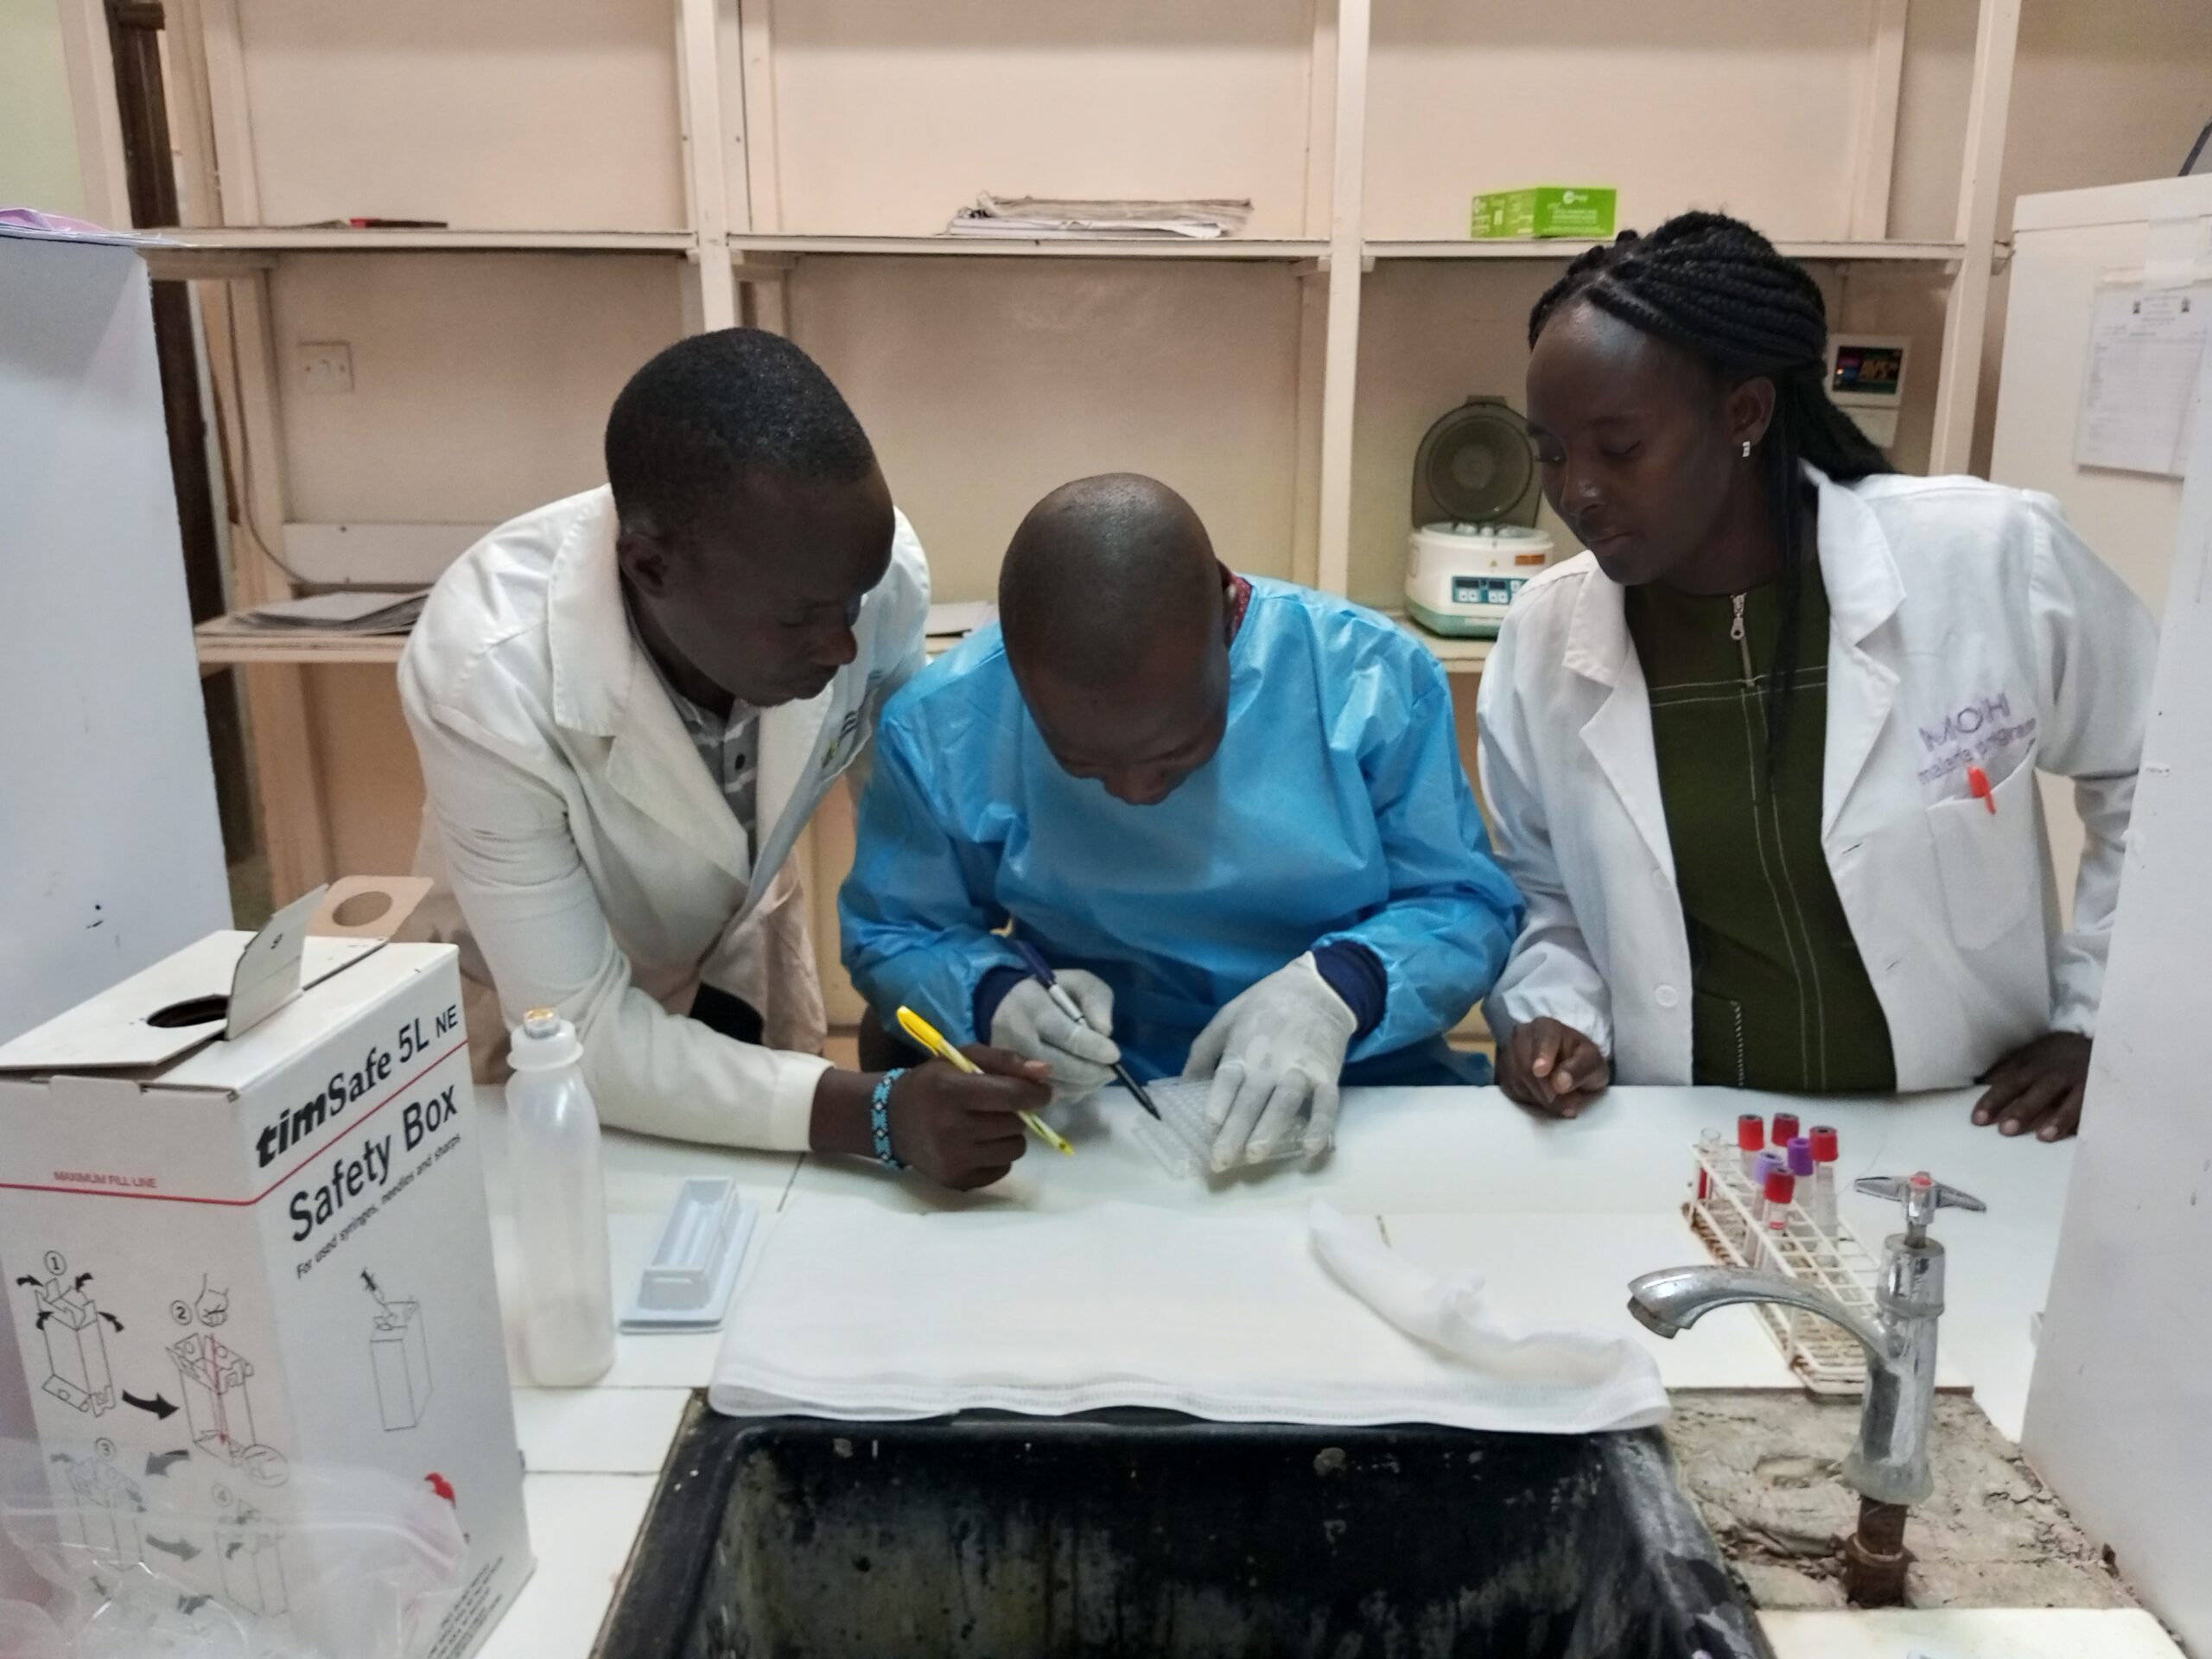 Three African scientists wearing lab coats and gloves looking at a scientific implement together